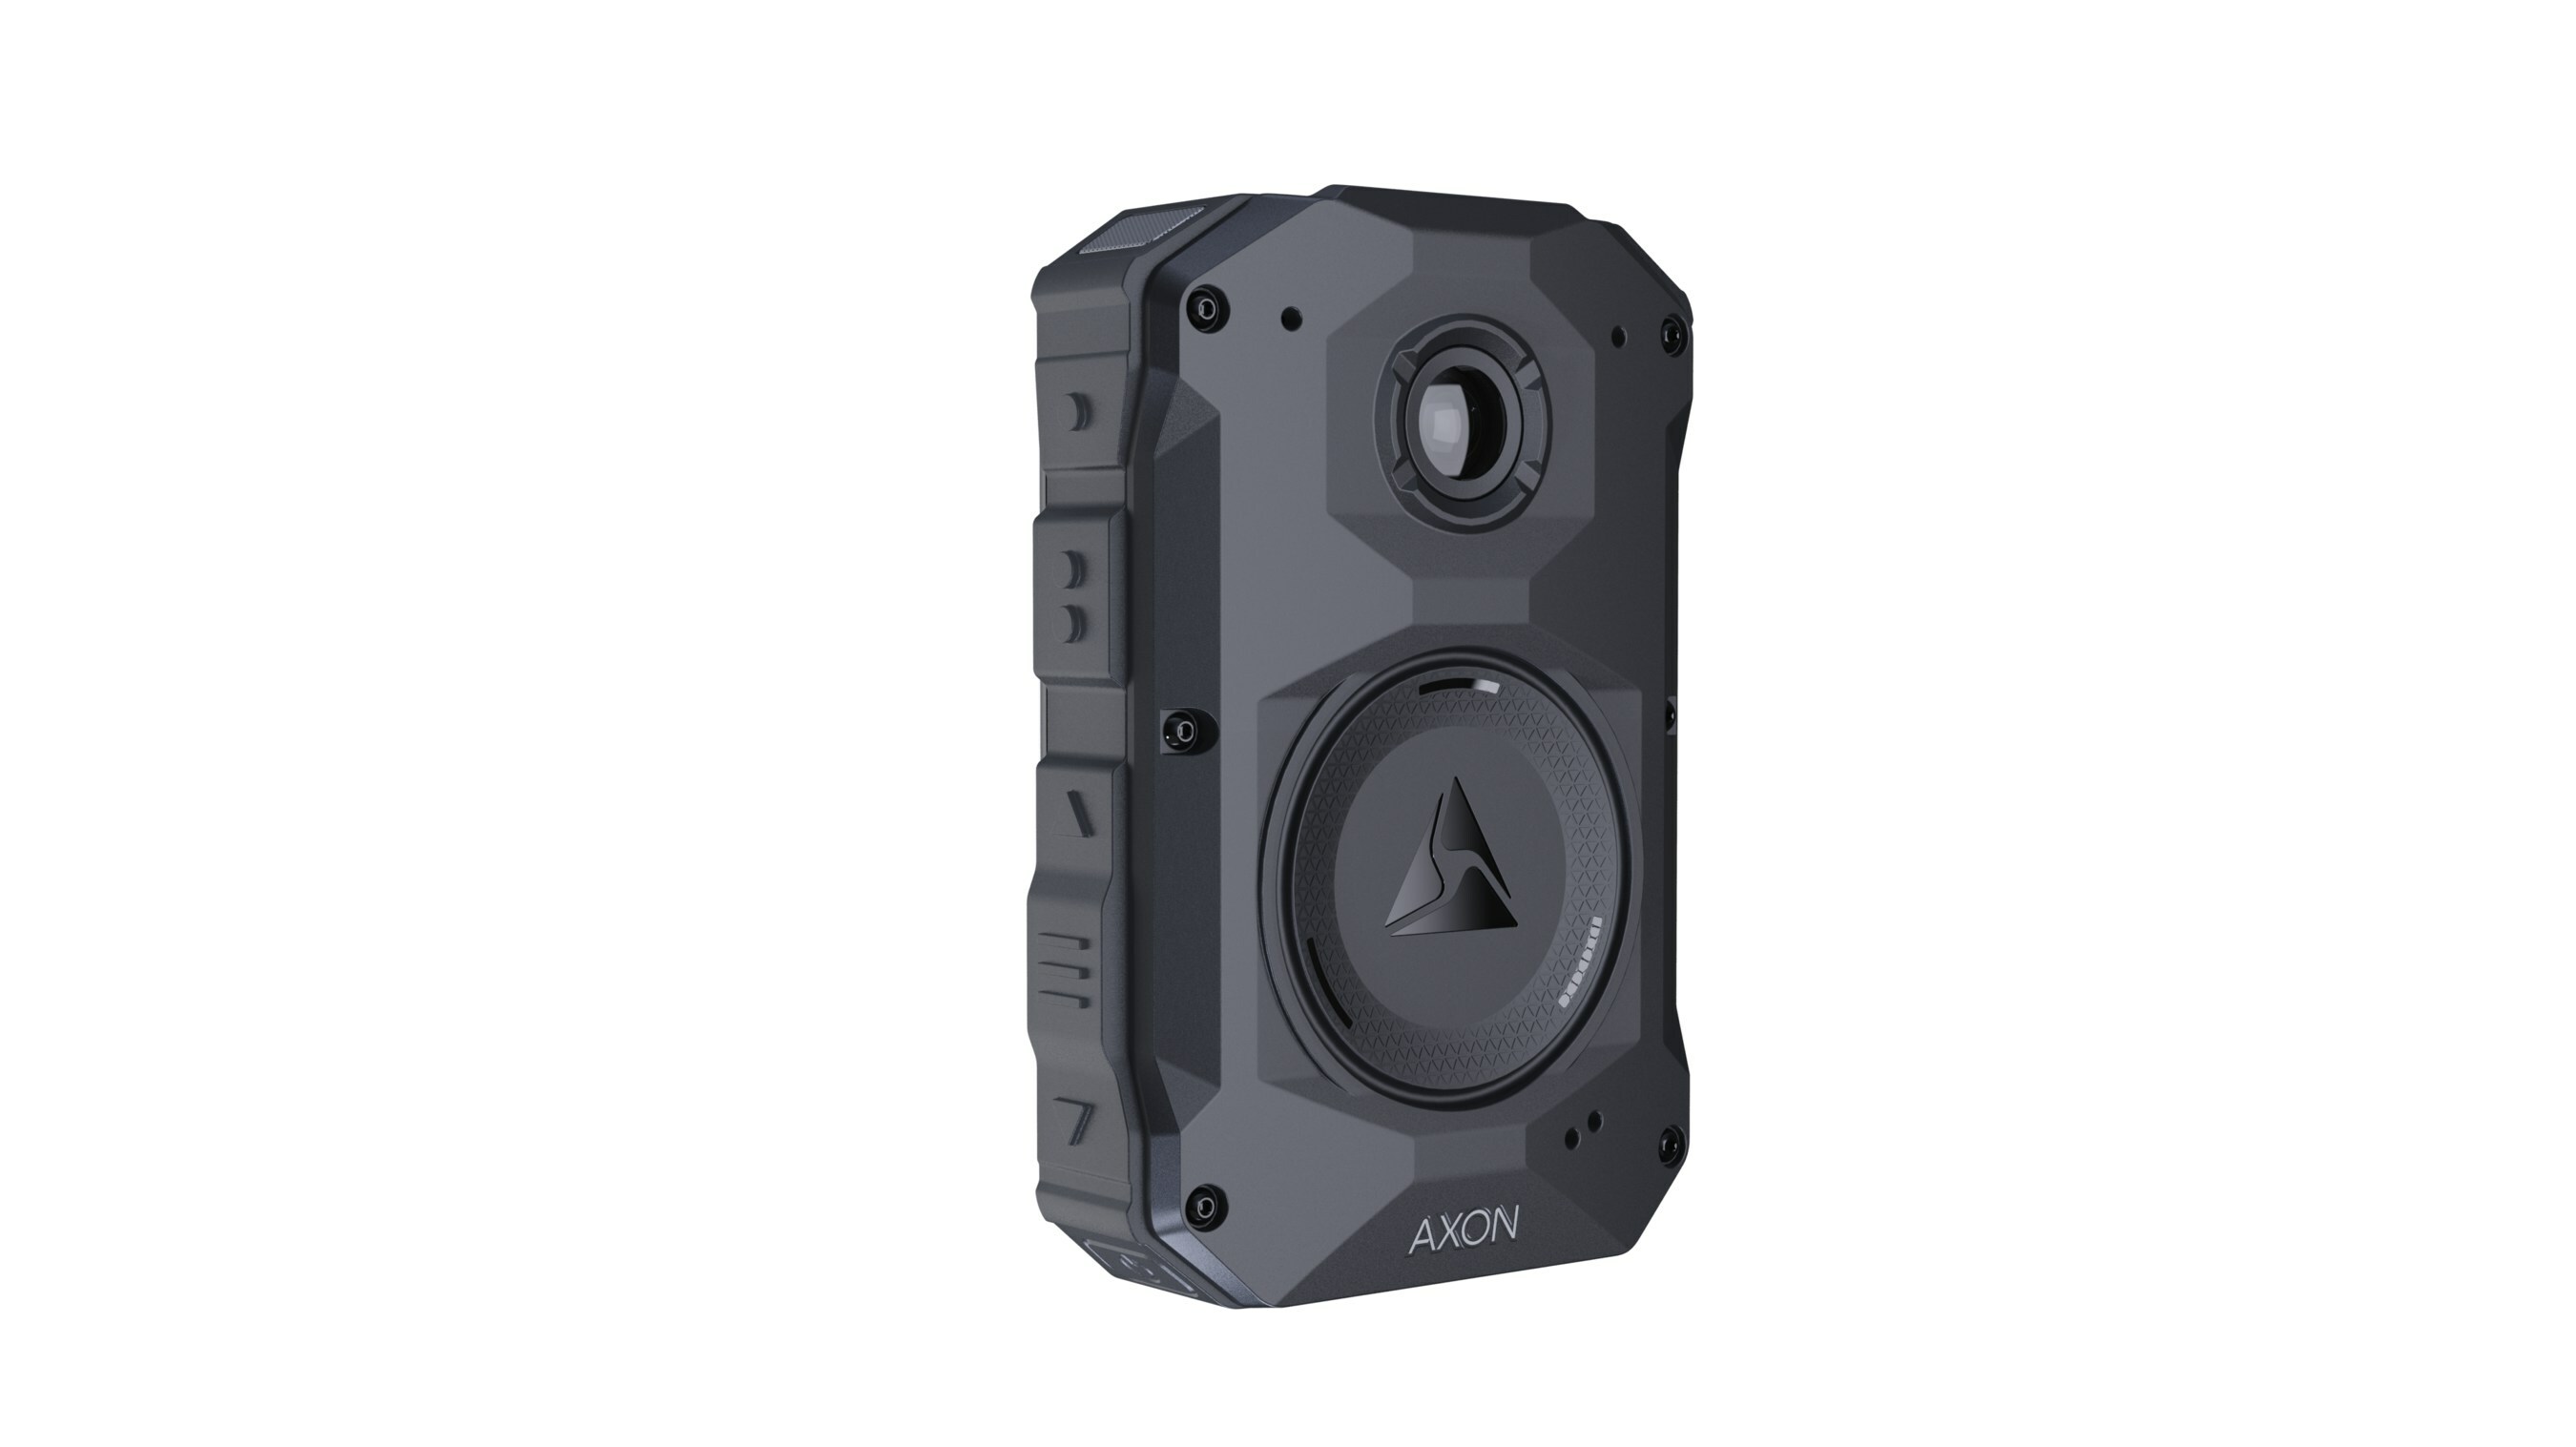 Axon launches next generation body camera with more features to